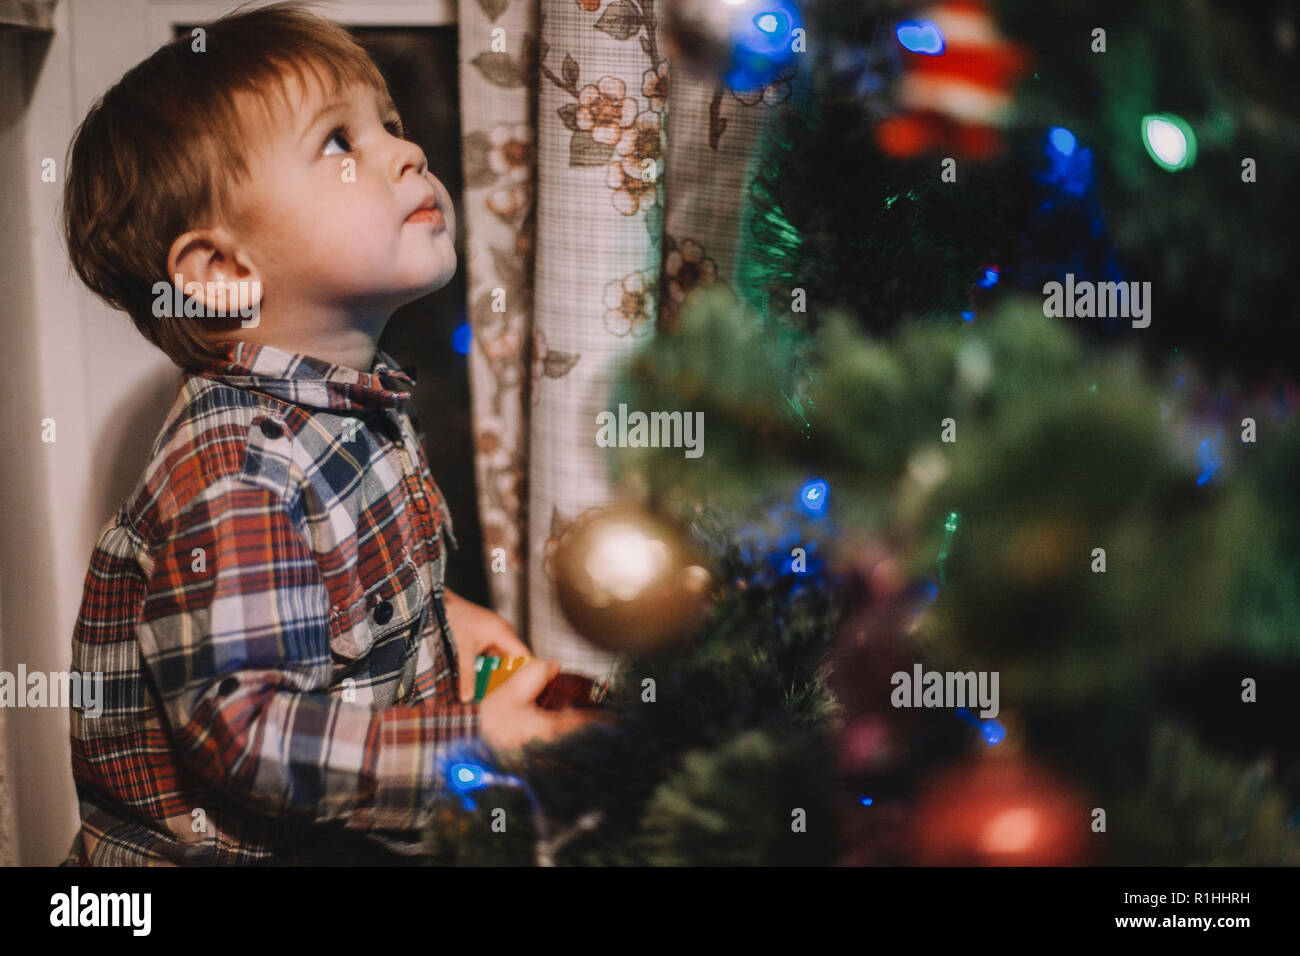 Baby boy looking at Christmas ornaments while standing beside Christmas tree at home Stock Photo